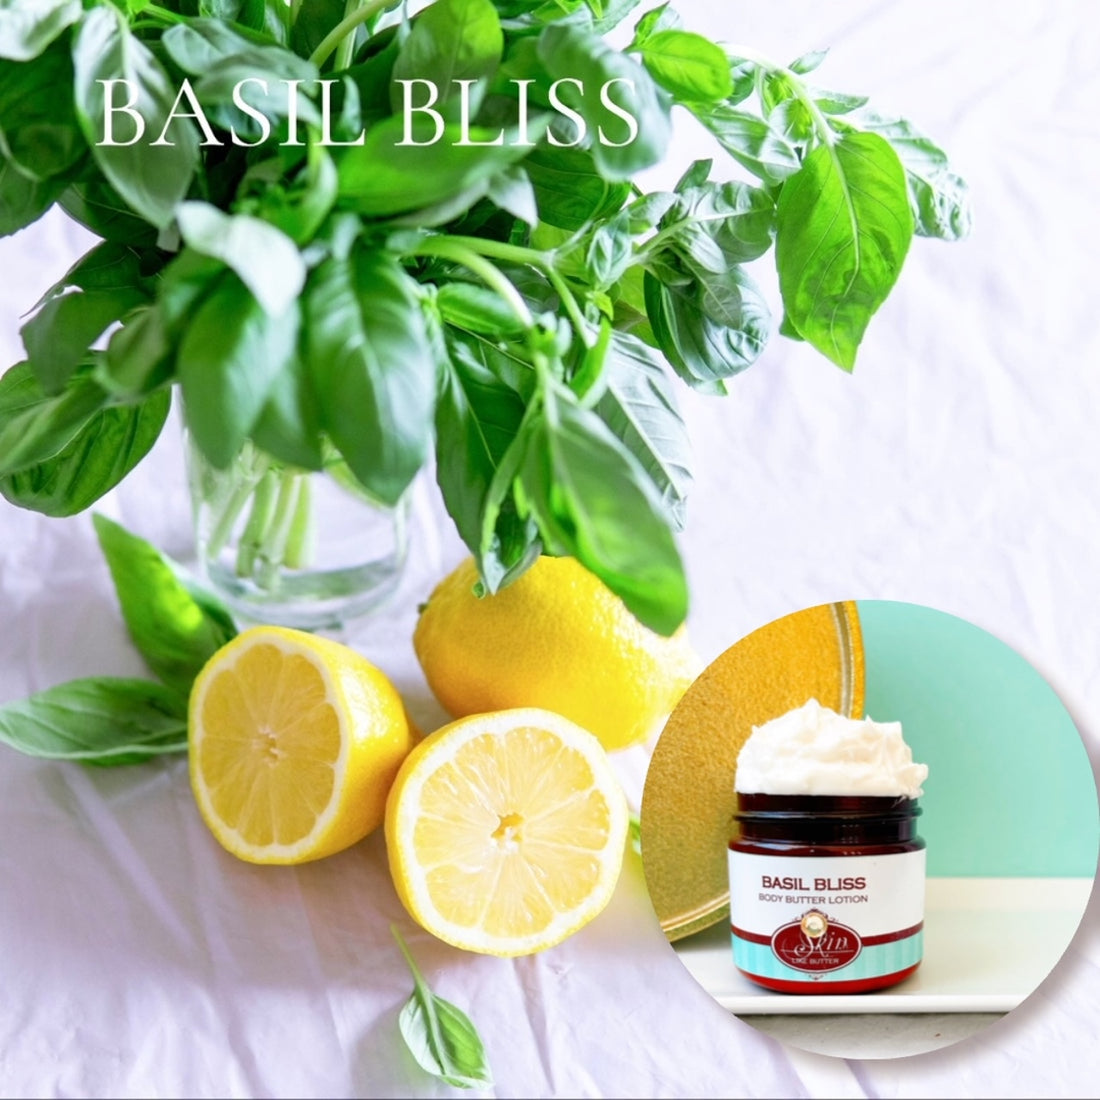 BASIL BLISS scented water free, vegan non-greasy Body Butter Lotion